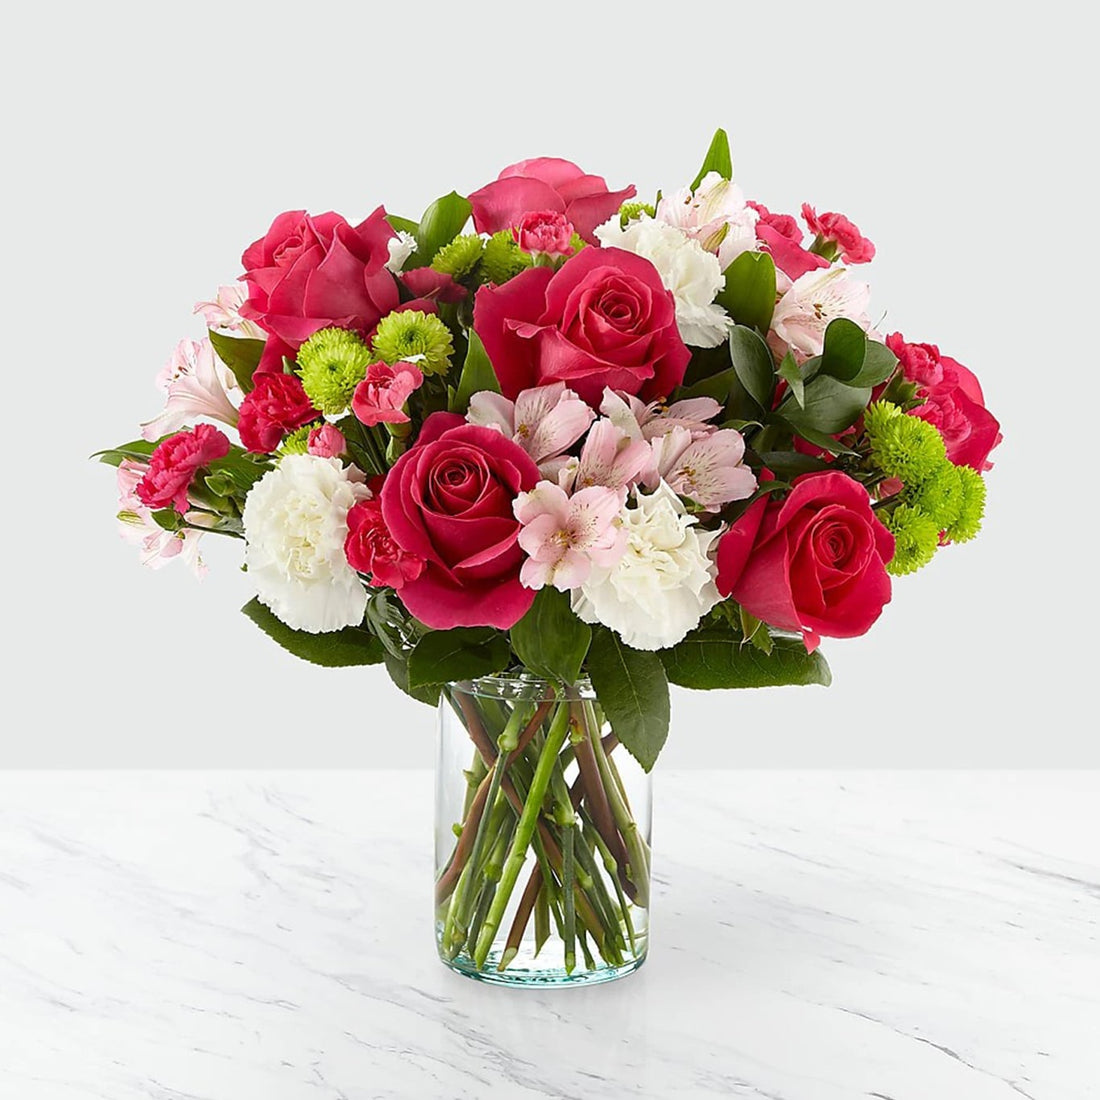 Pretty Roses, Flowers for garden and home decoration with variety of hot pink roses, pale pink alstroemeria, it is a beautiful gift for anniversary, flower gift for birthday, flowers for all occasions and decoration, Fresh Flowers Orlando.